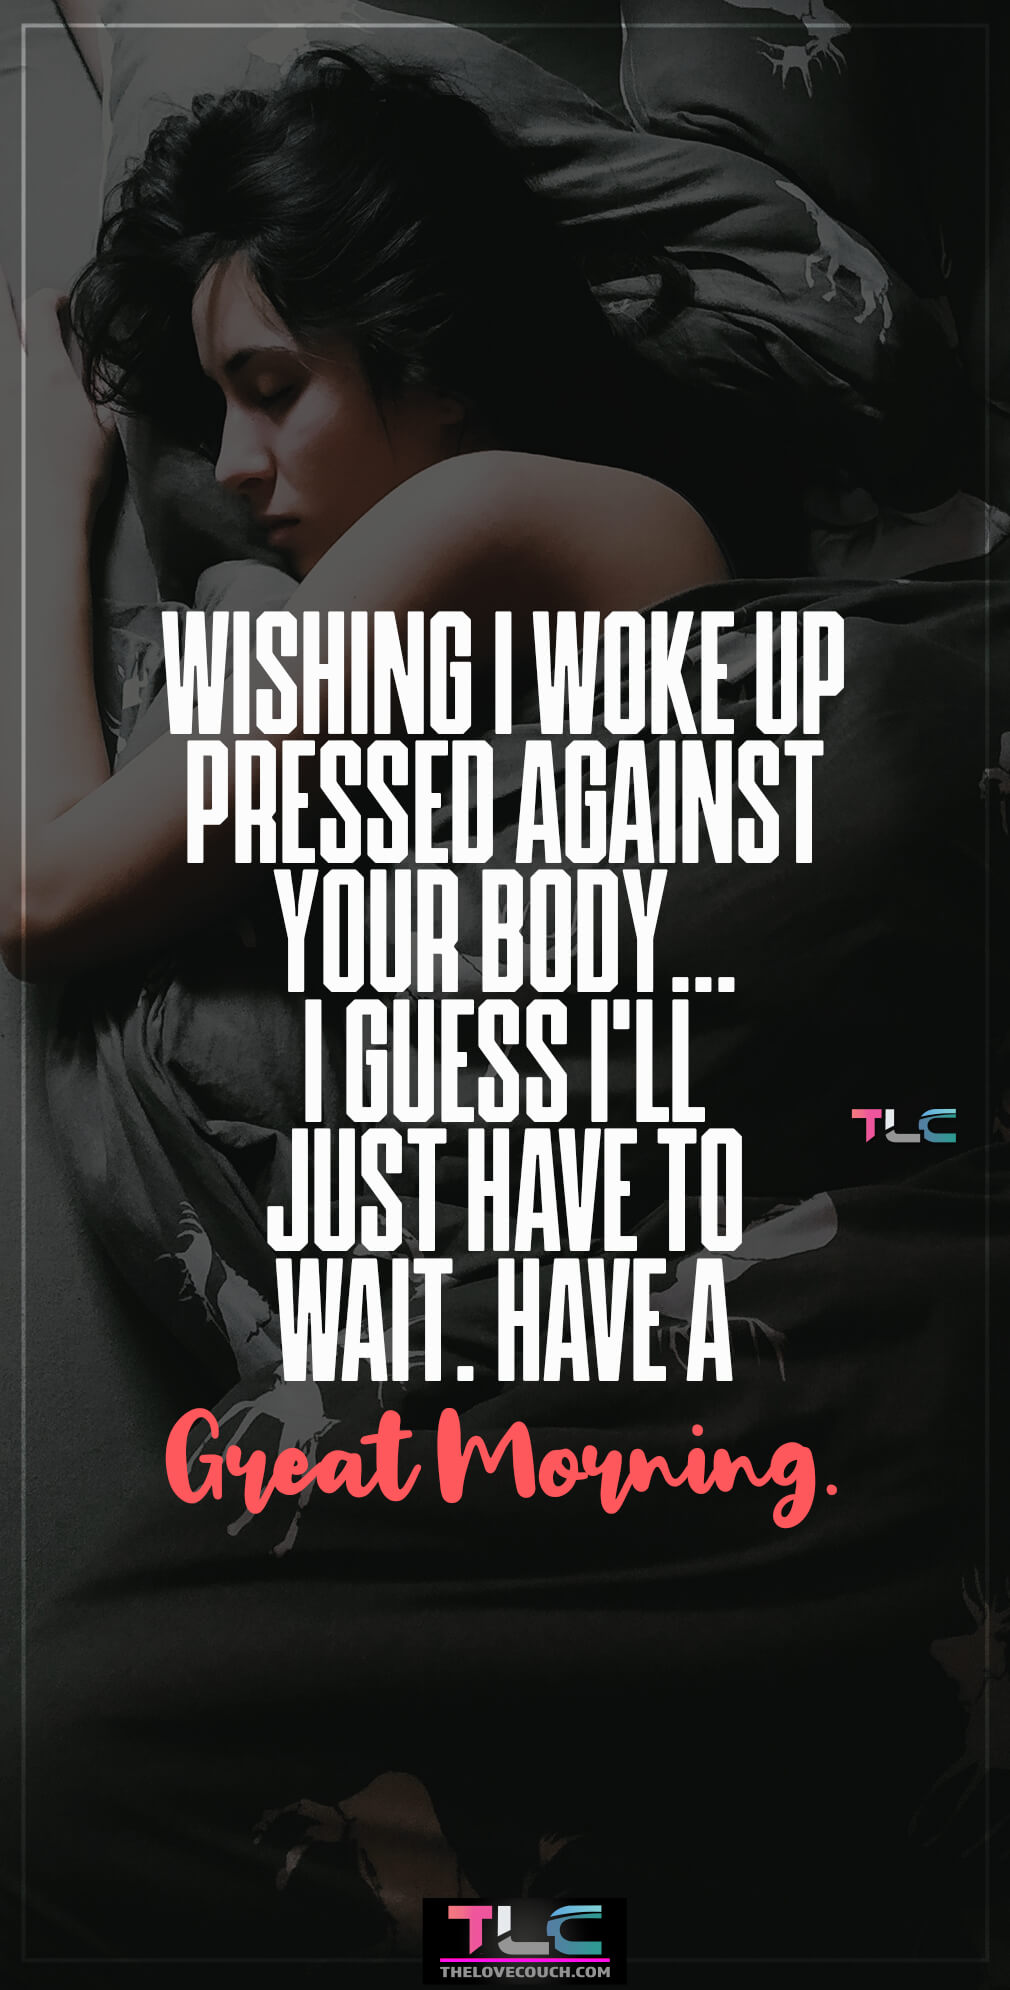 Wishing I woke up pressed against your body… I guess I’ll just have to wait. Have a great morning.